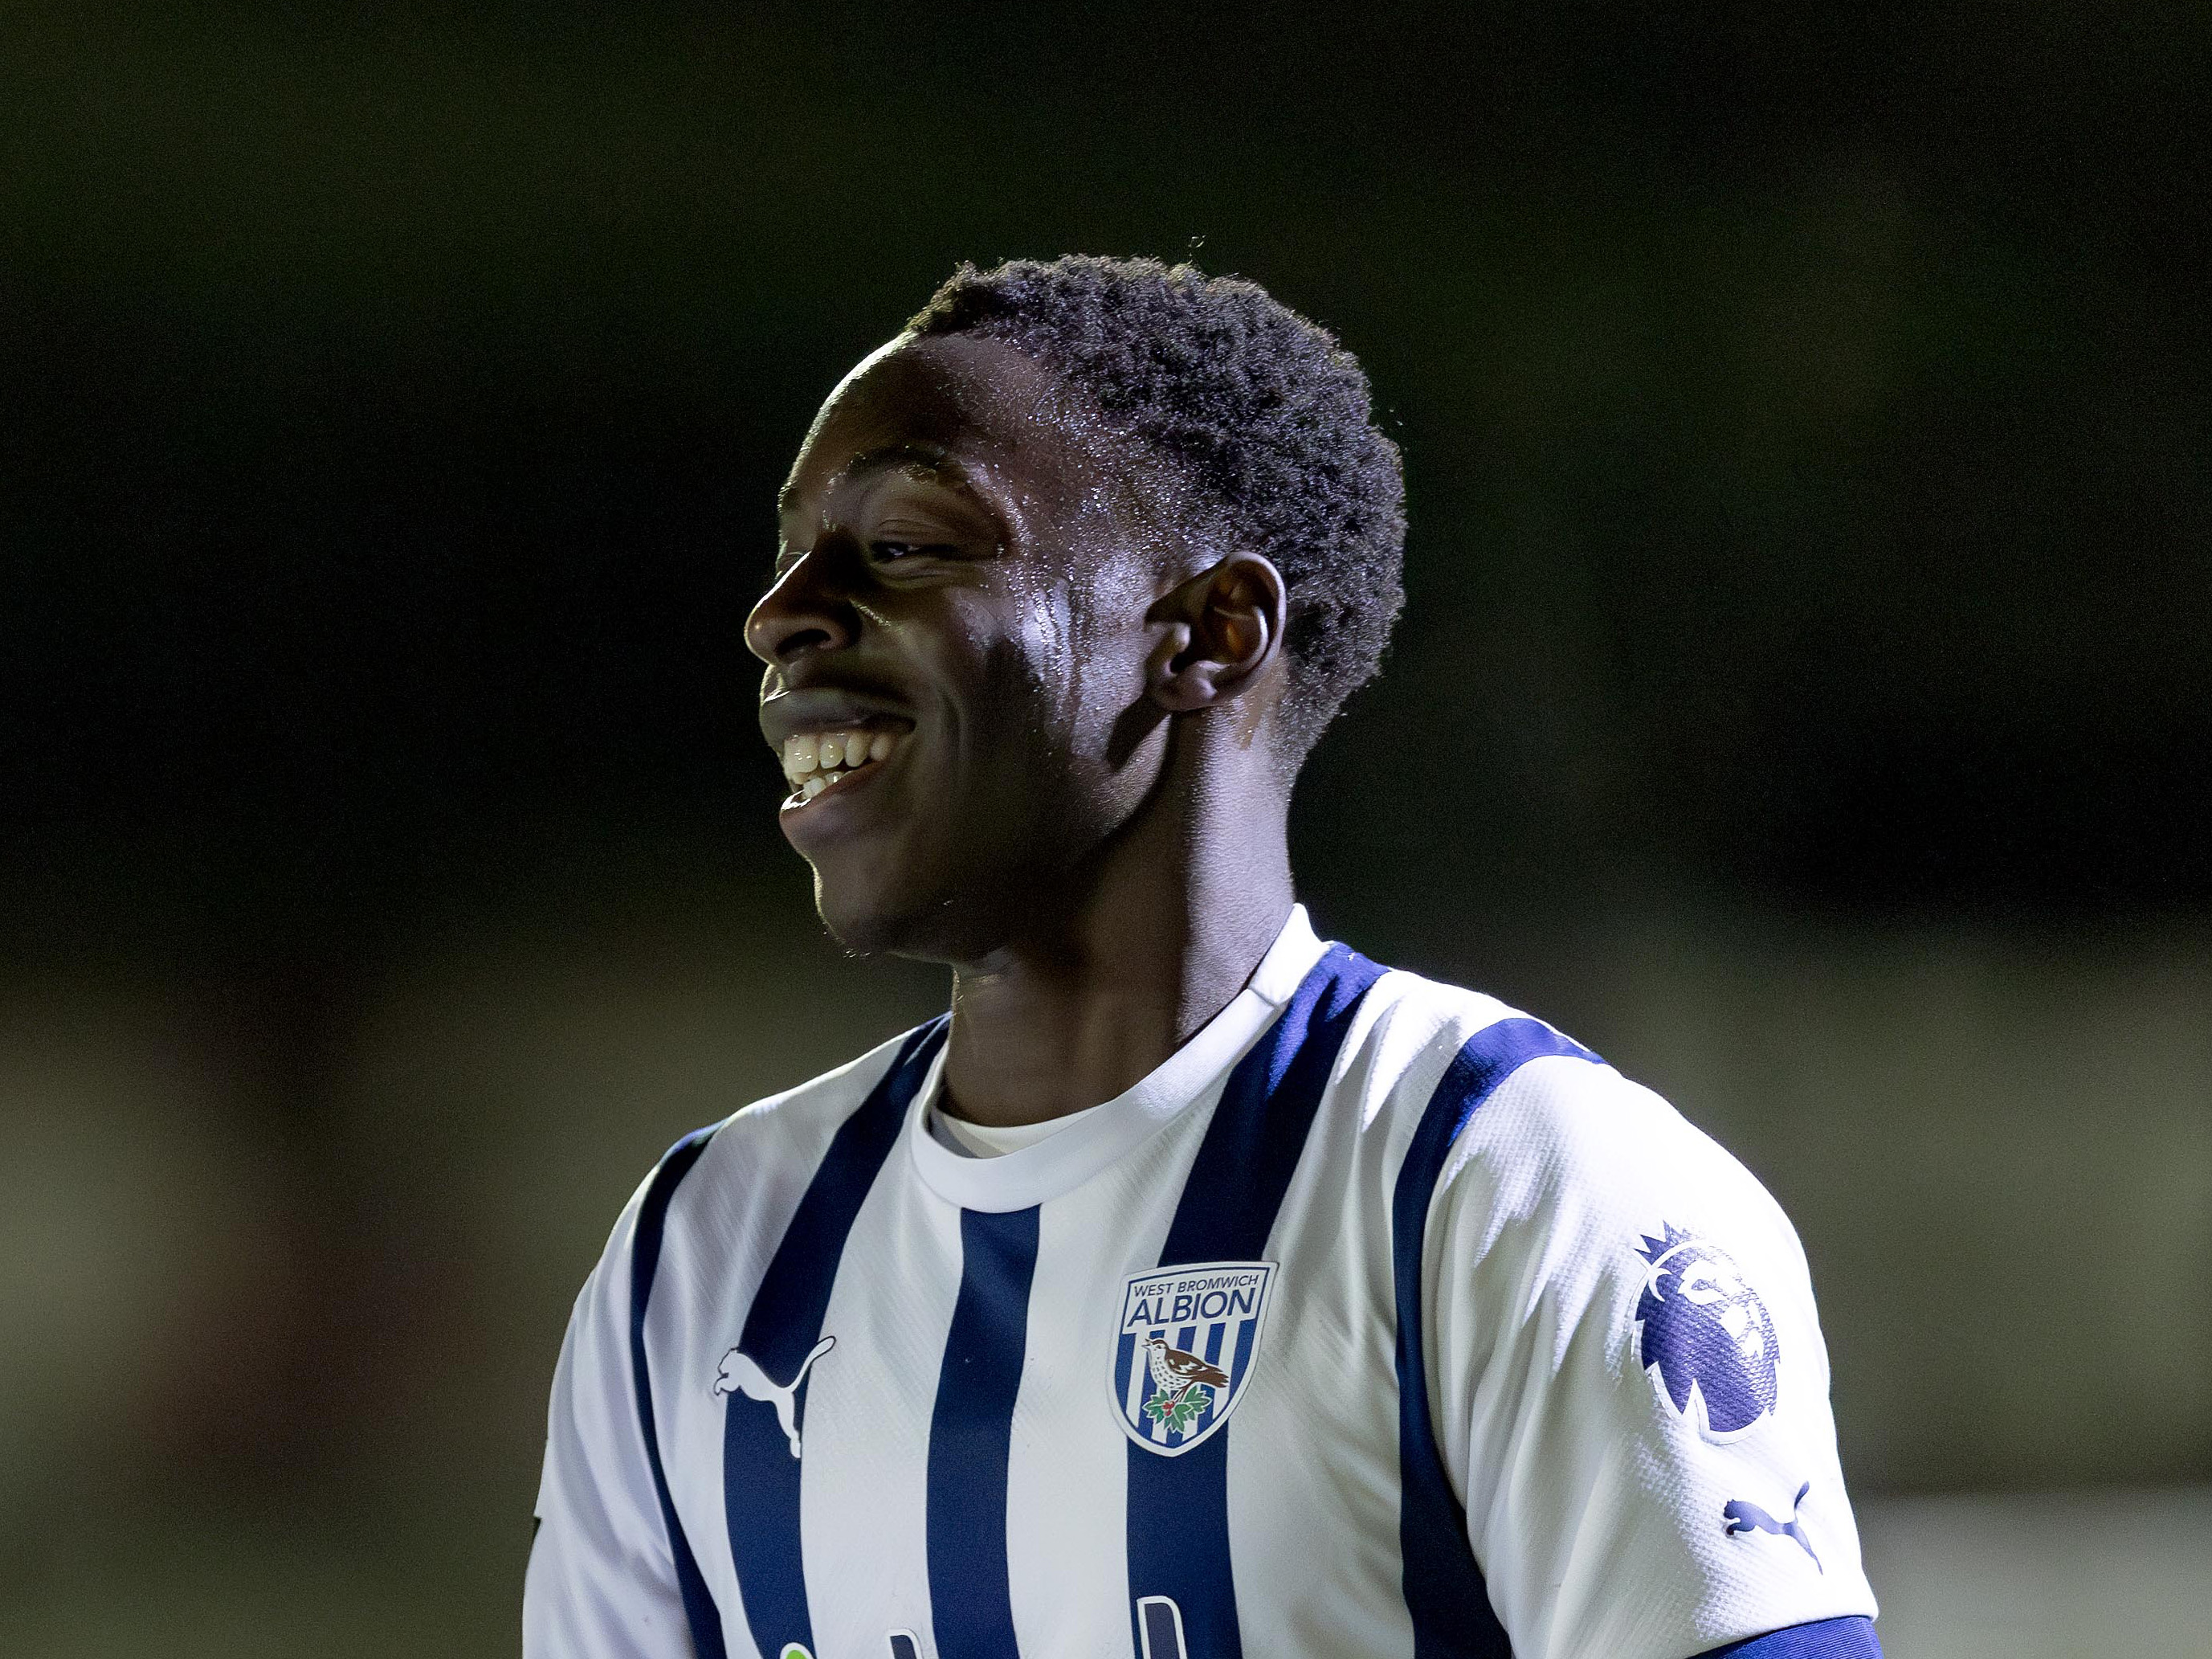 A photo of Albion academy striker Eseosa Sule smiling in the 23/24 home kit